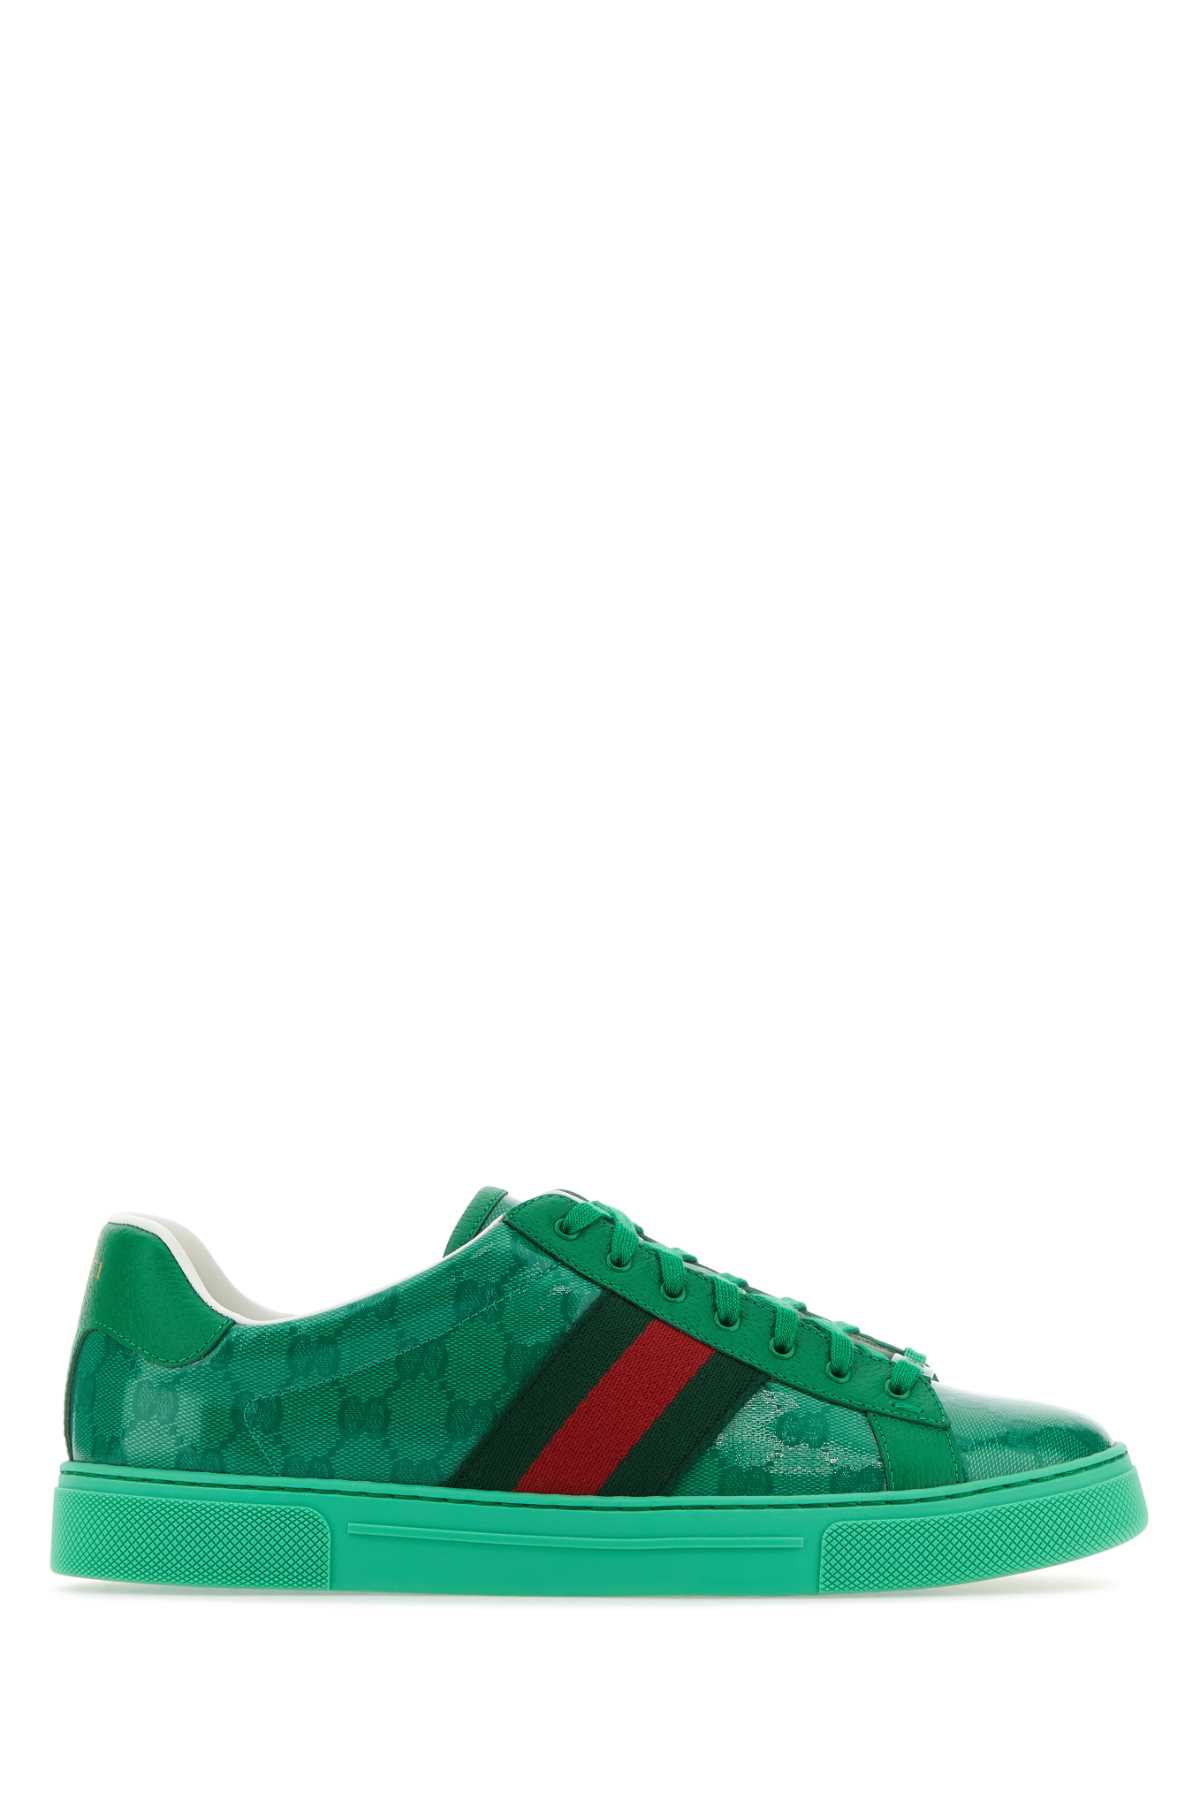 Gucci Green Gg Crystal Fabric Ace Sneakers